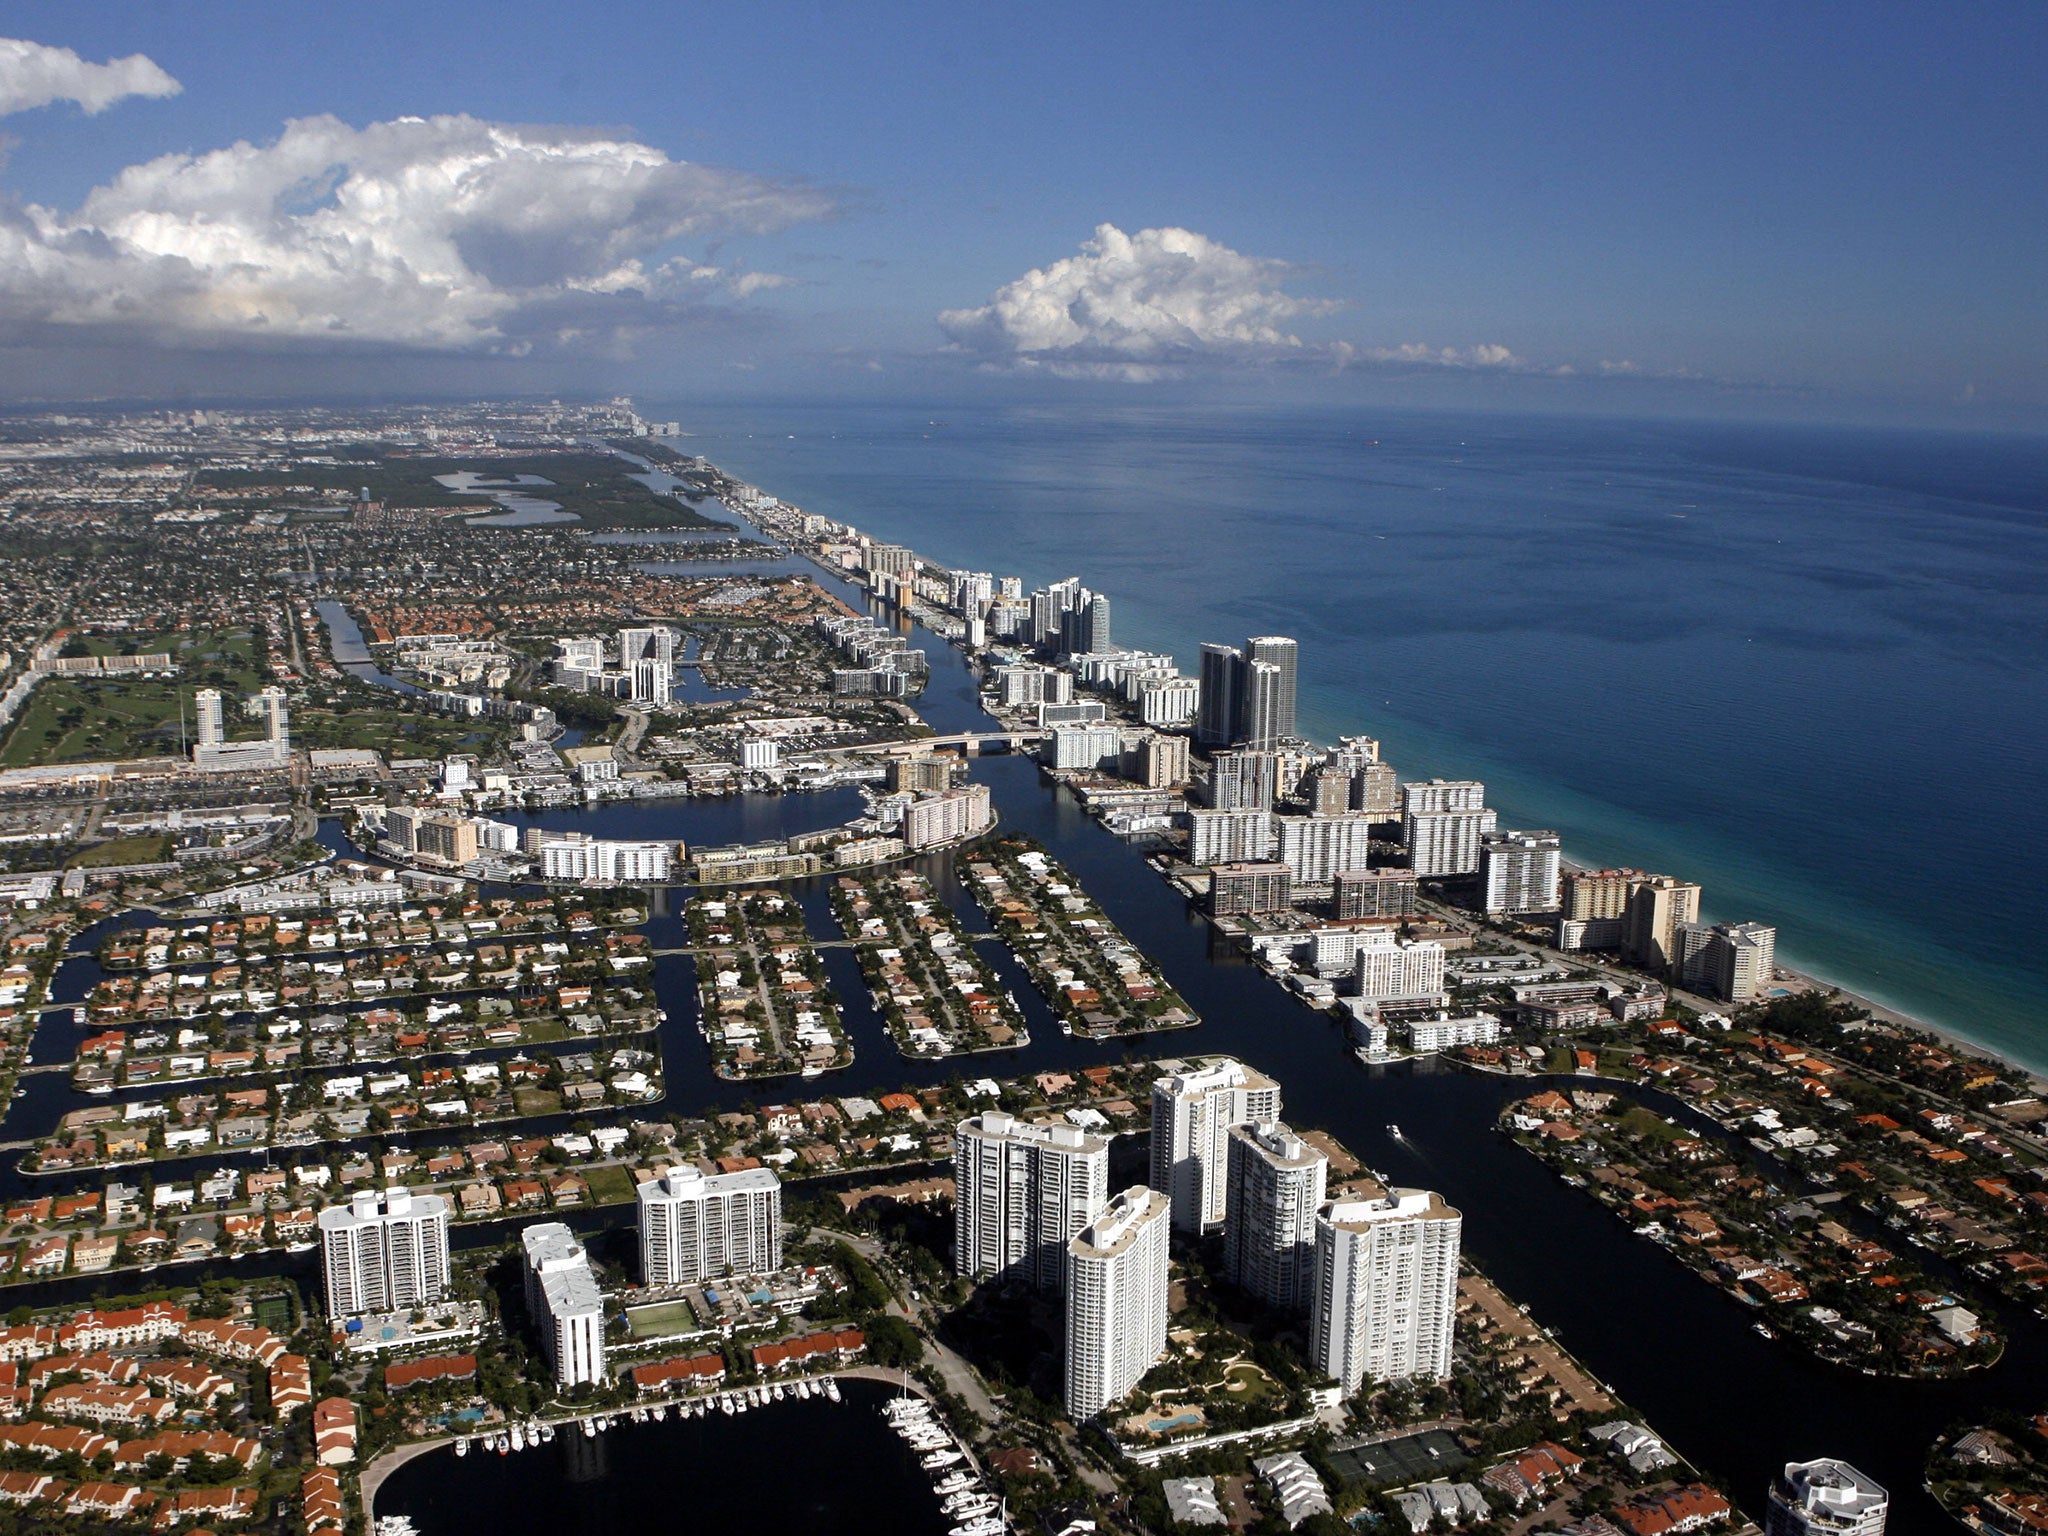 Low-lying Miami is particularly prone to flooding